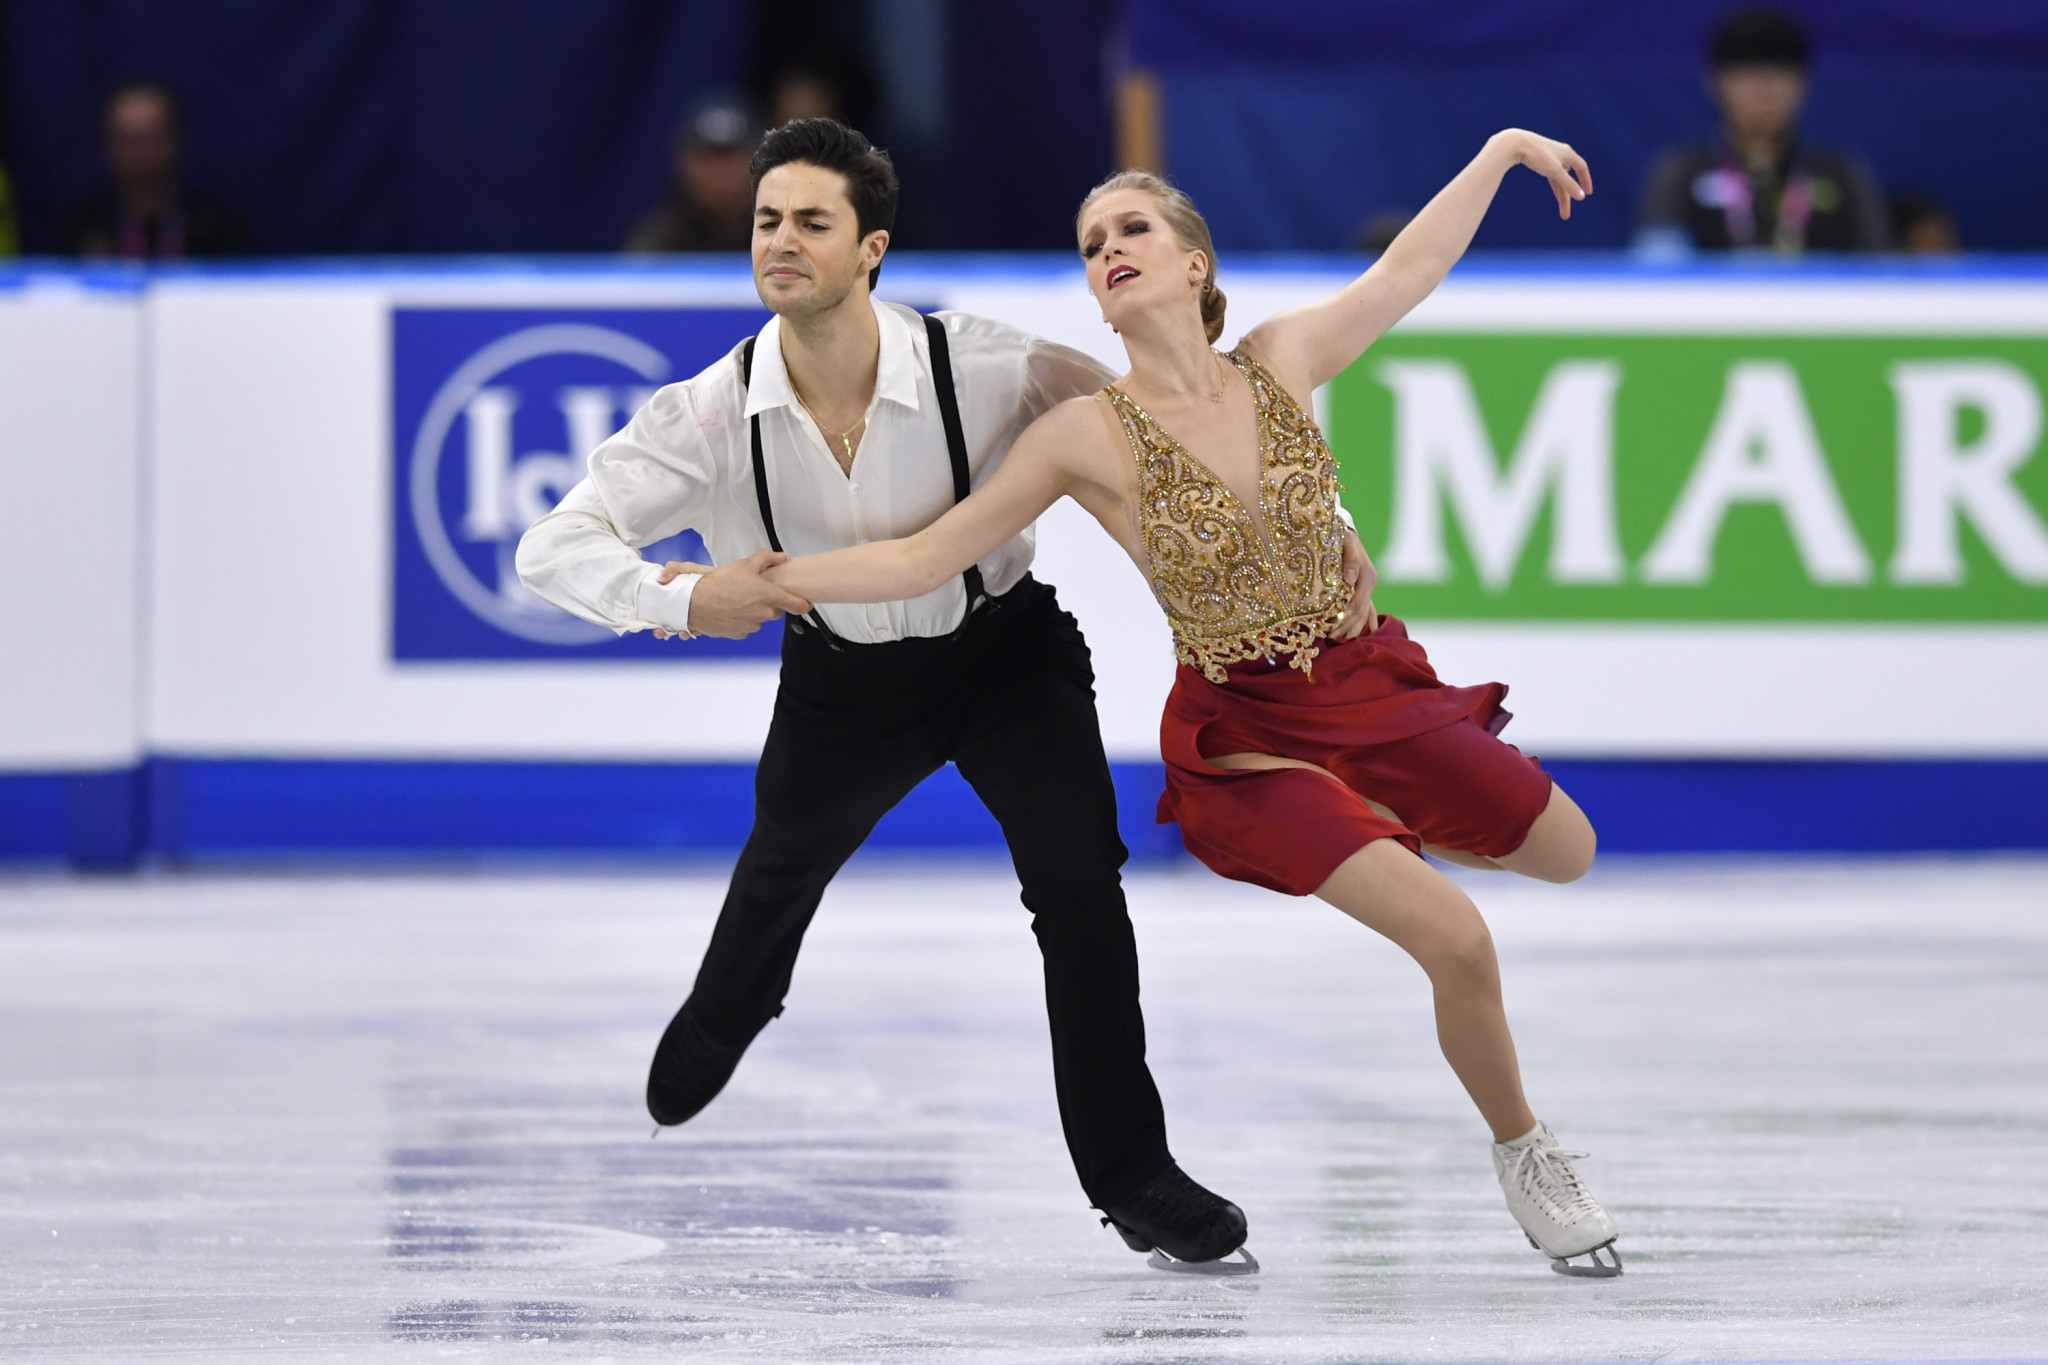 Kaitlyn Weaver won three World Championship medals in ice dance alongside Andrew Poje ©Getty Images